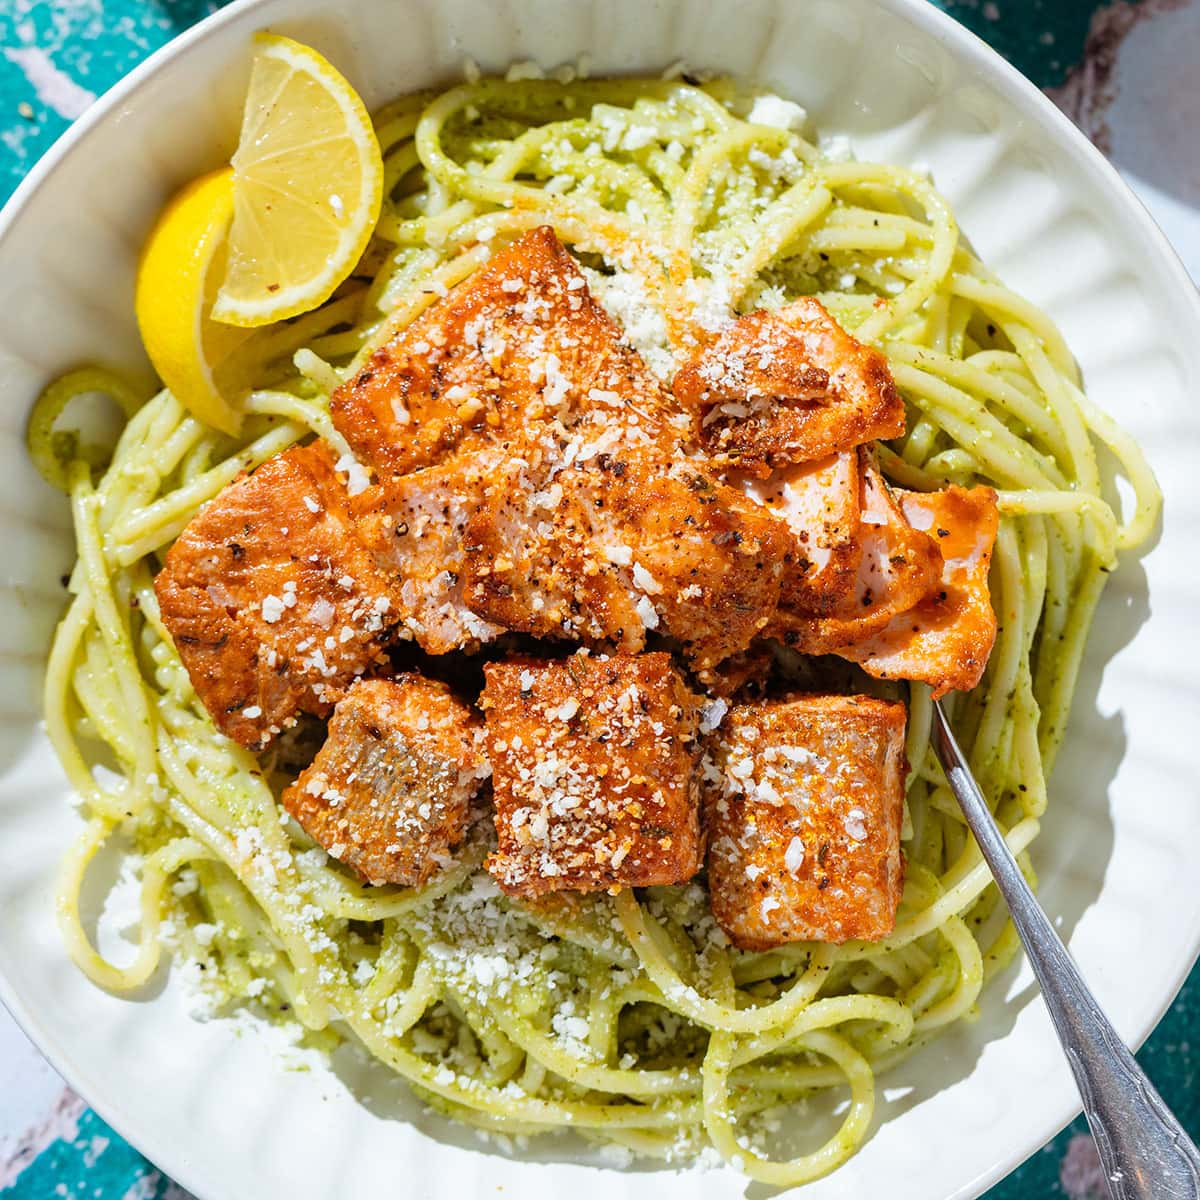 Pesto spaghetti in a white bowl topped with roasted salmon and pecorino cheese with lemon wedges on the side.